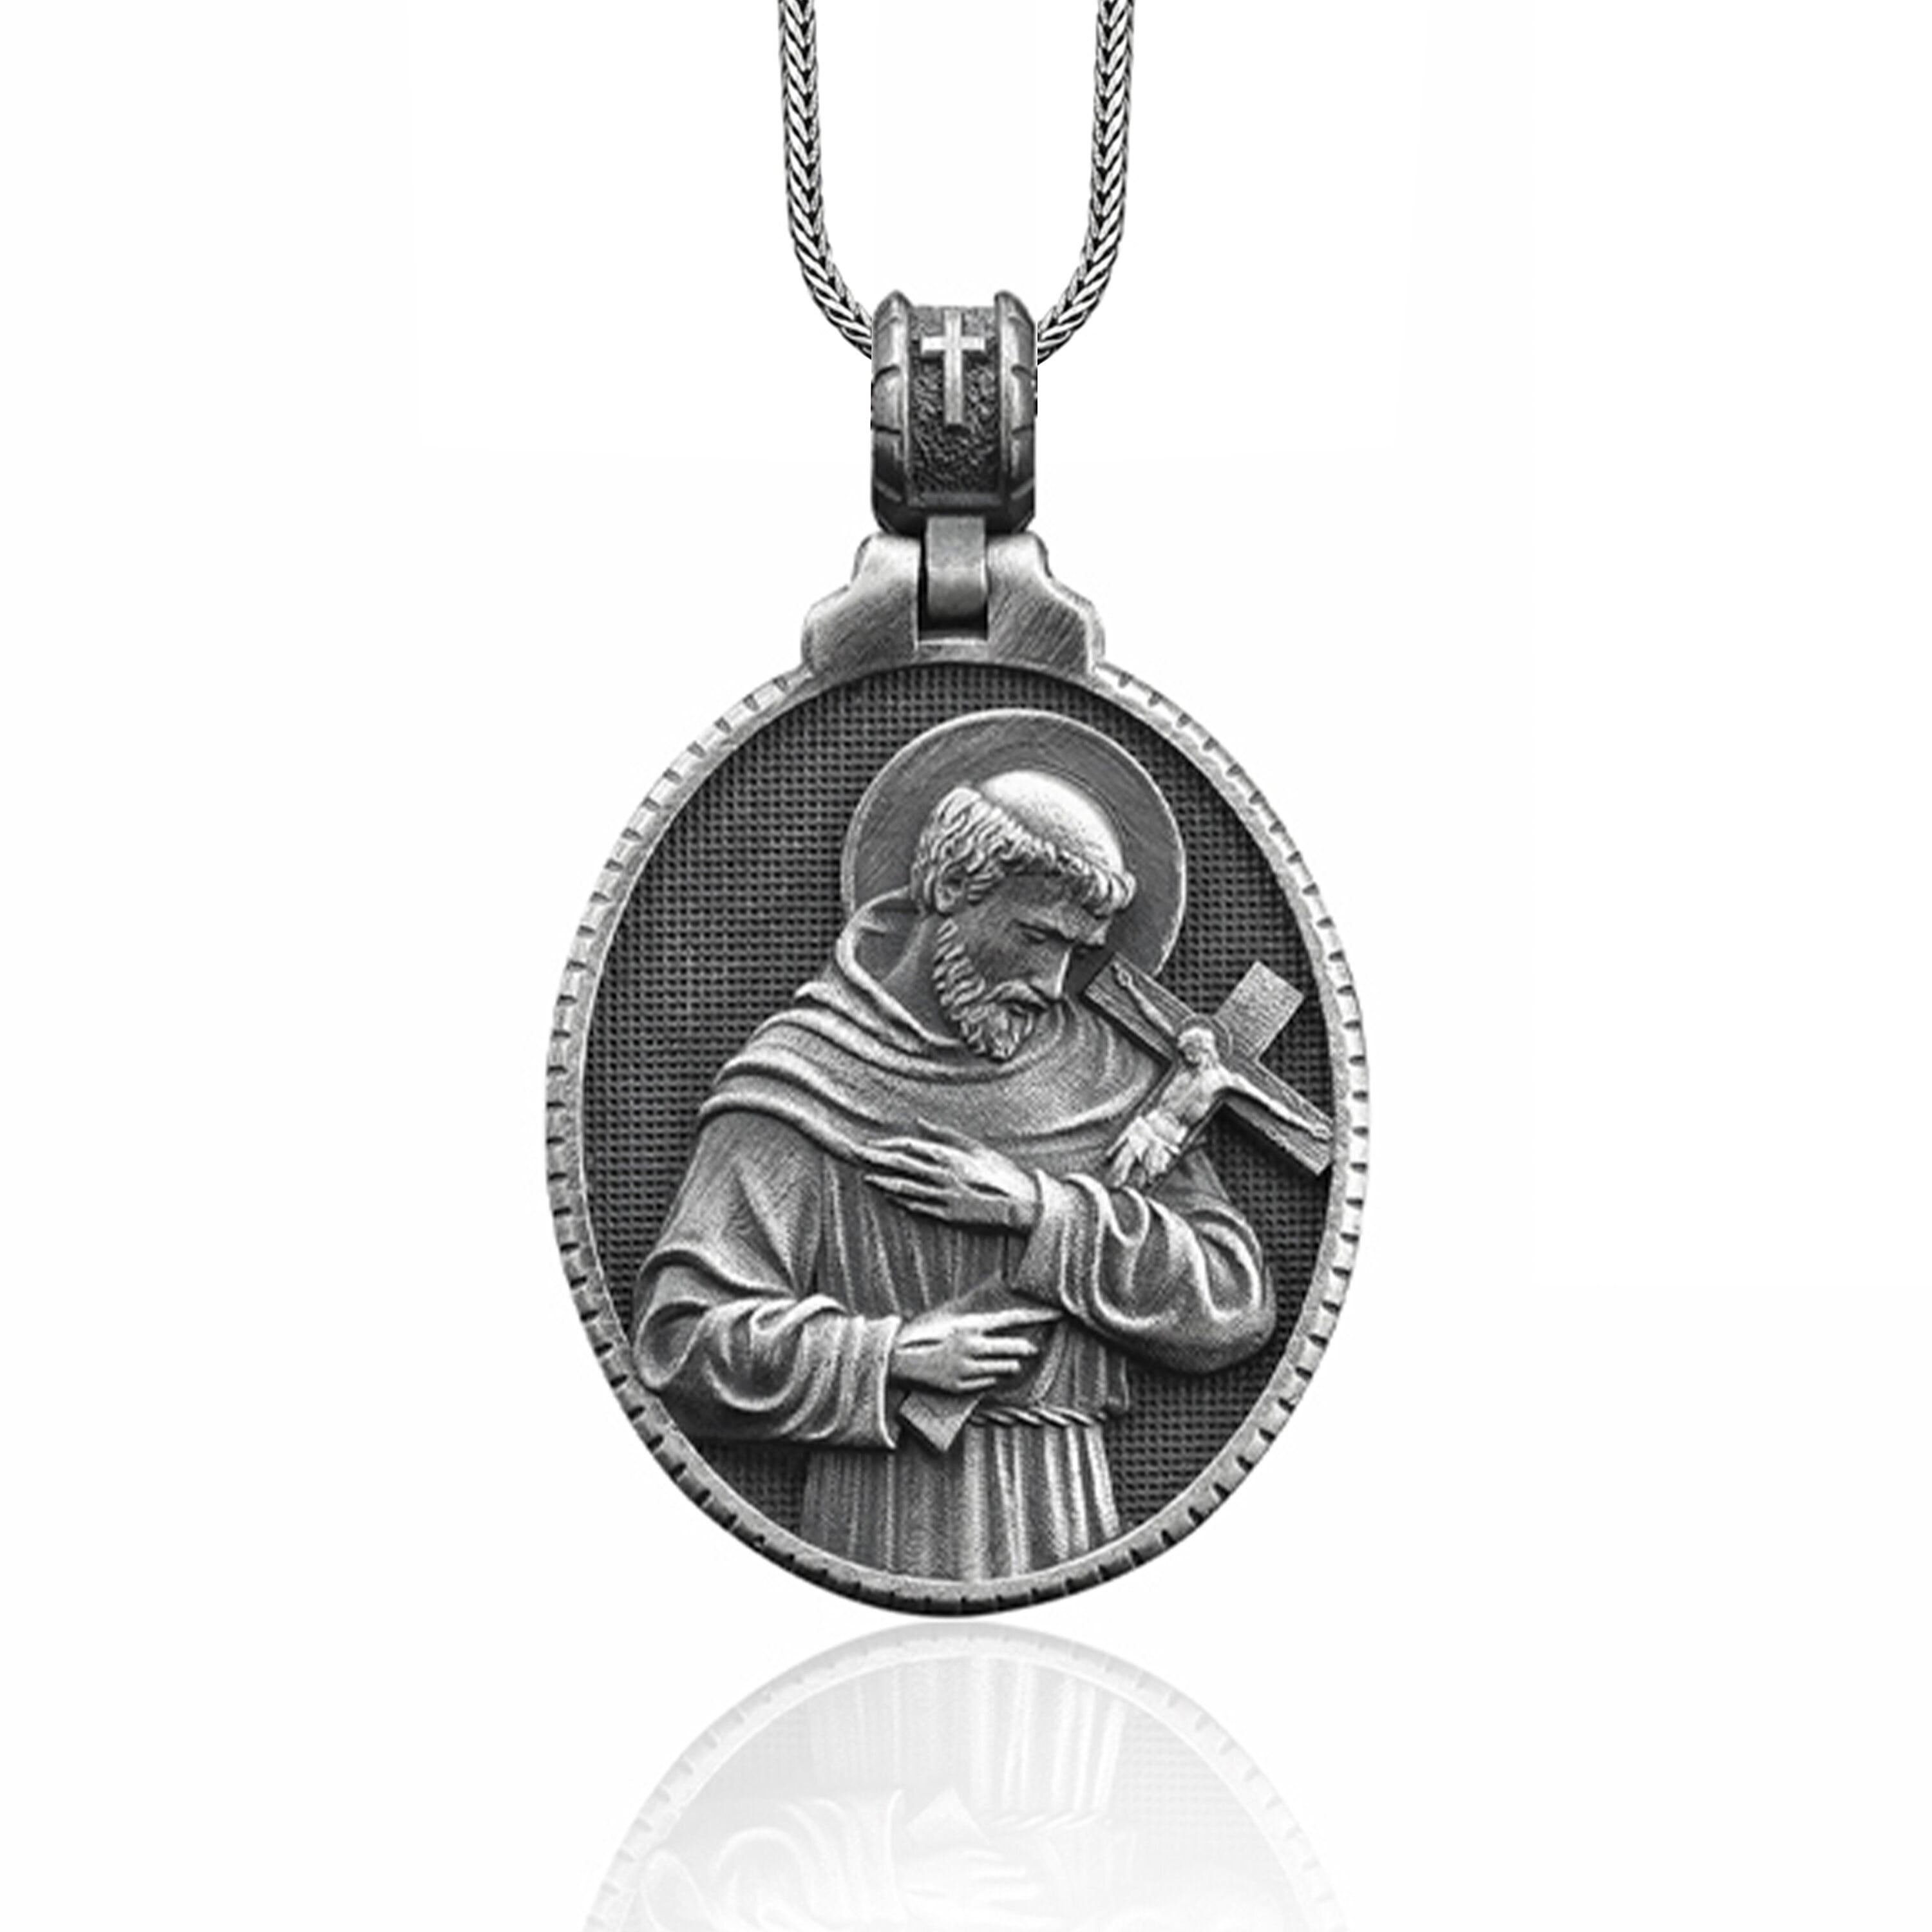 St. Francis de Assisi Pendant Necklace - Malouf on the Plaza